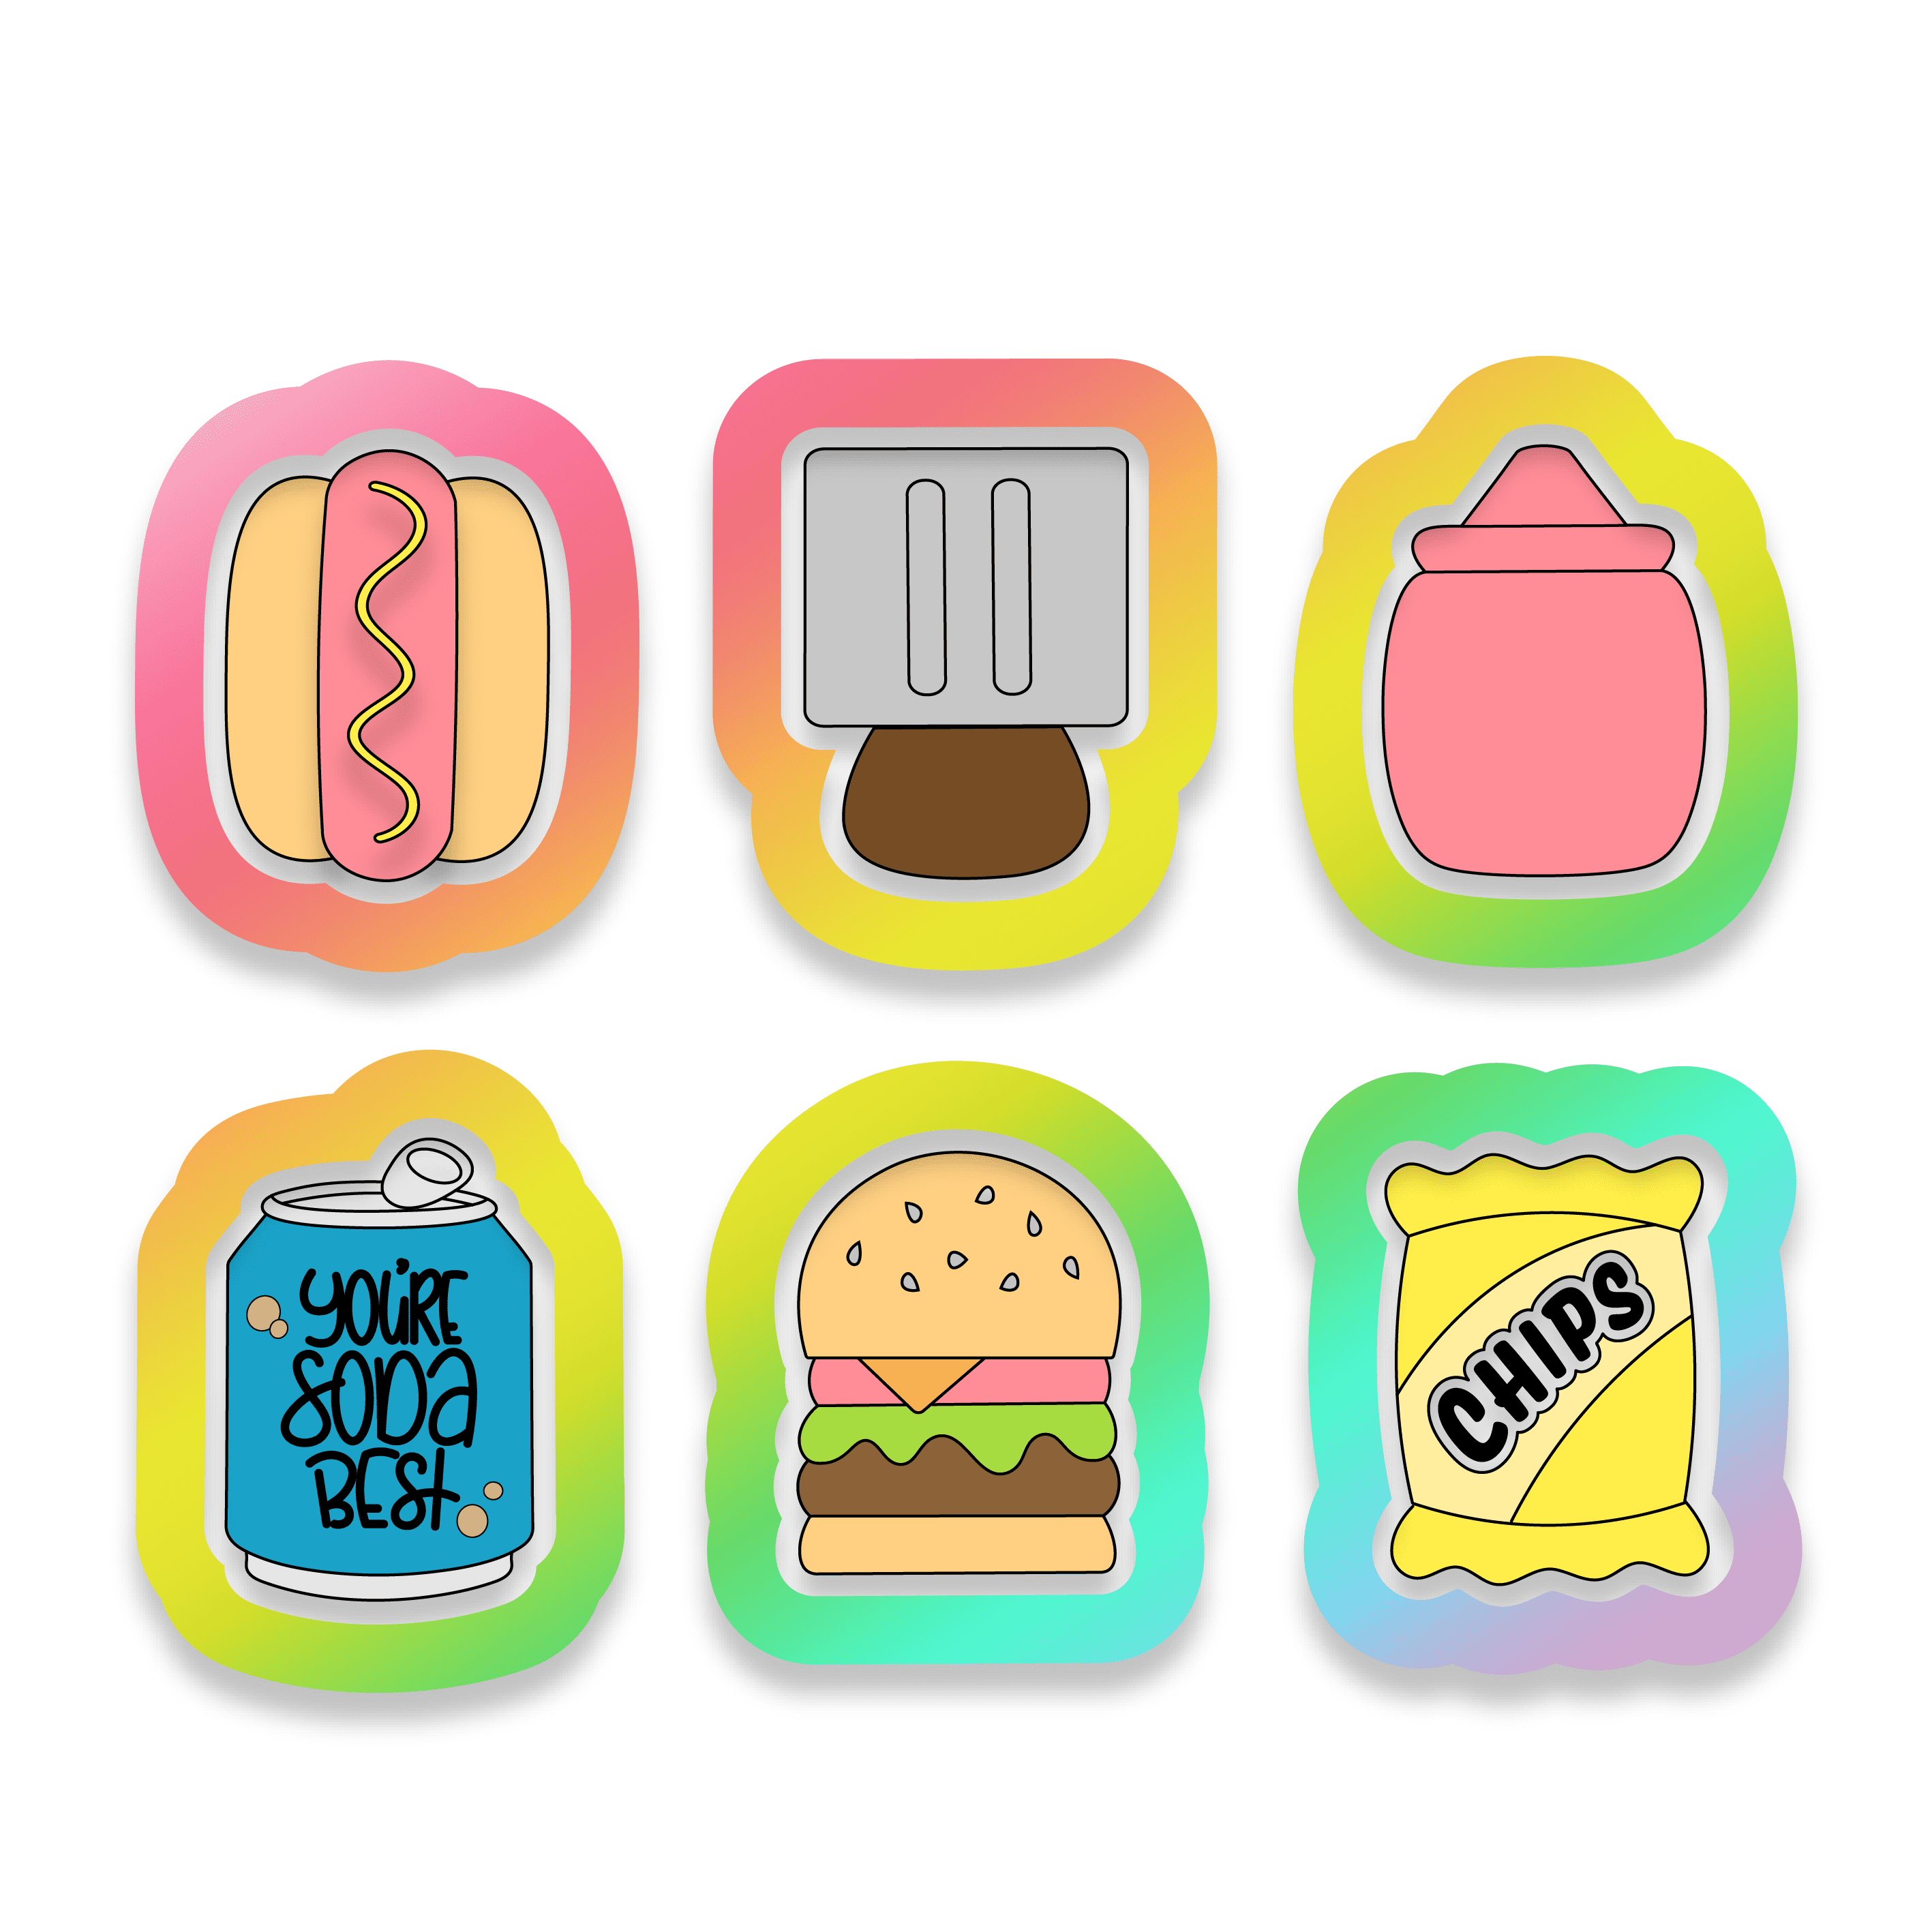 Set of 6 mini bbq cookie cutter images, a hamburger, a soda can, a hot dog, on top. Then underneath a ketchup bottle, a bag of chips, and a spatula.